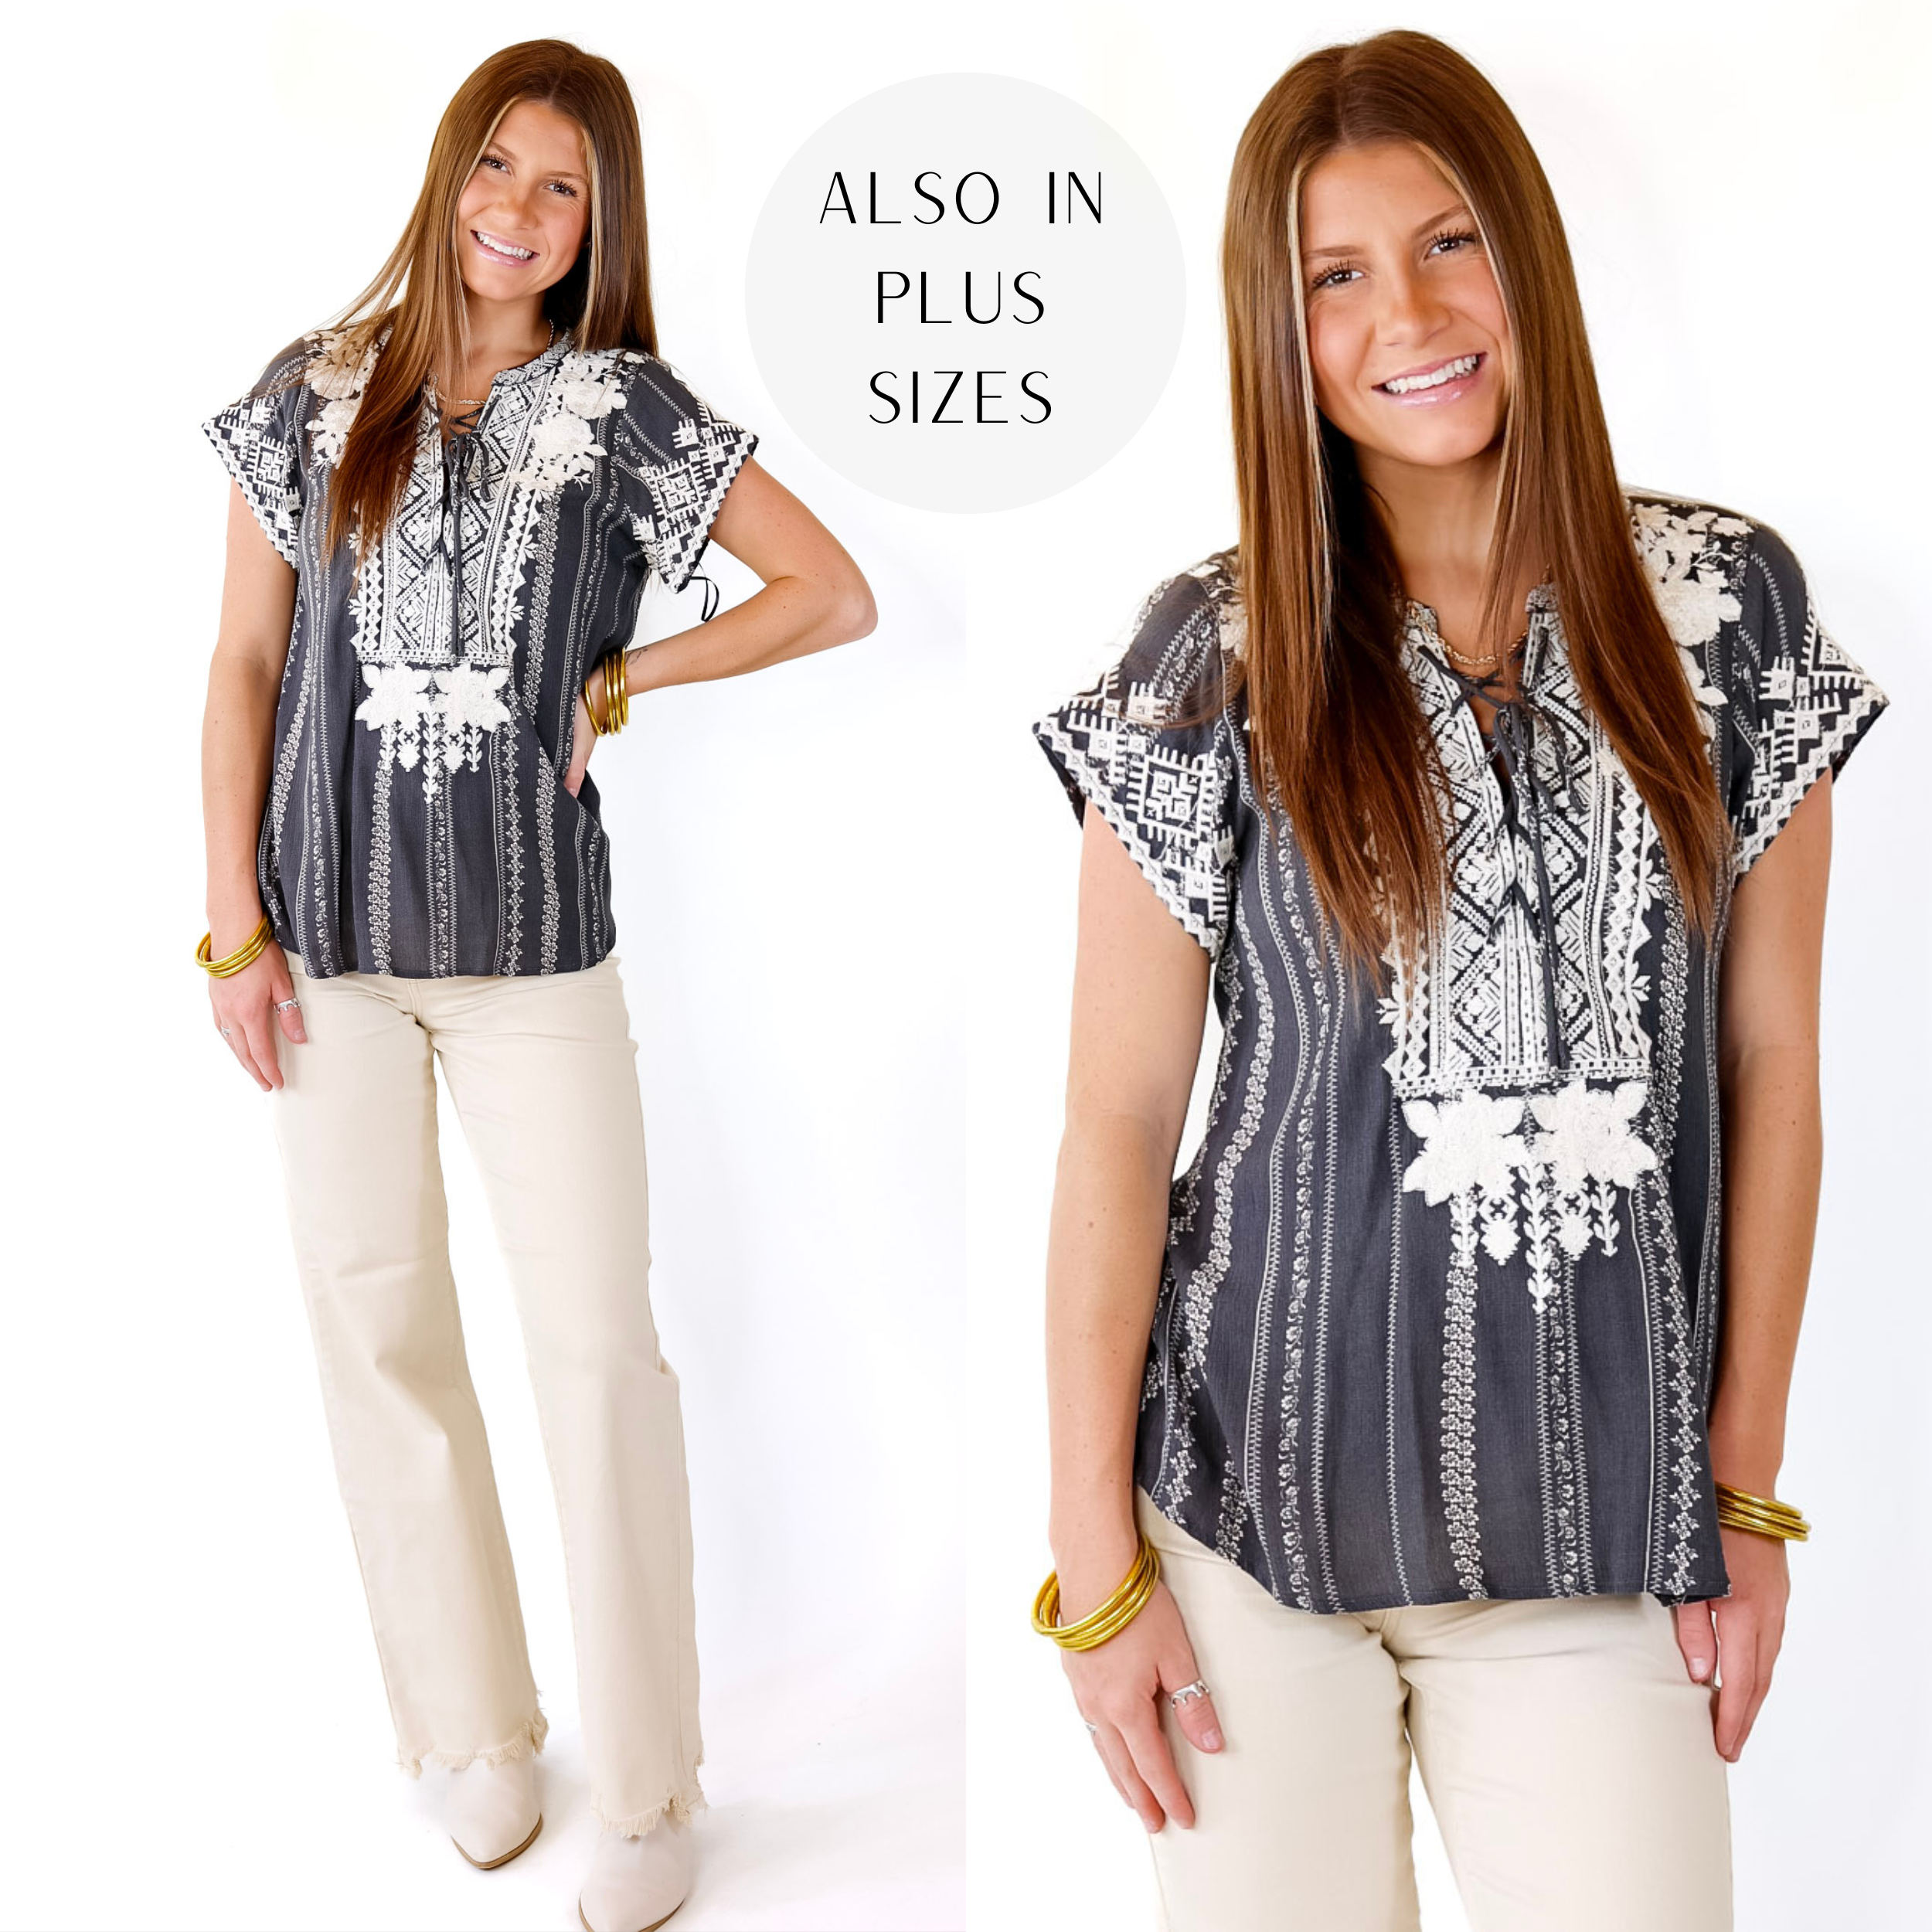 Coastal Comfort Floral Embroidered Top with Criss Cross Neckline in Charcoal Grey